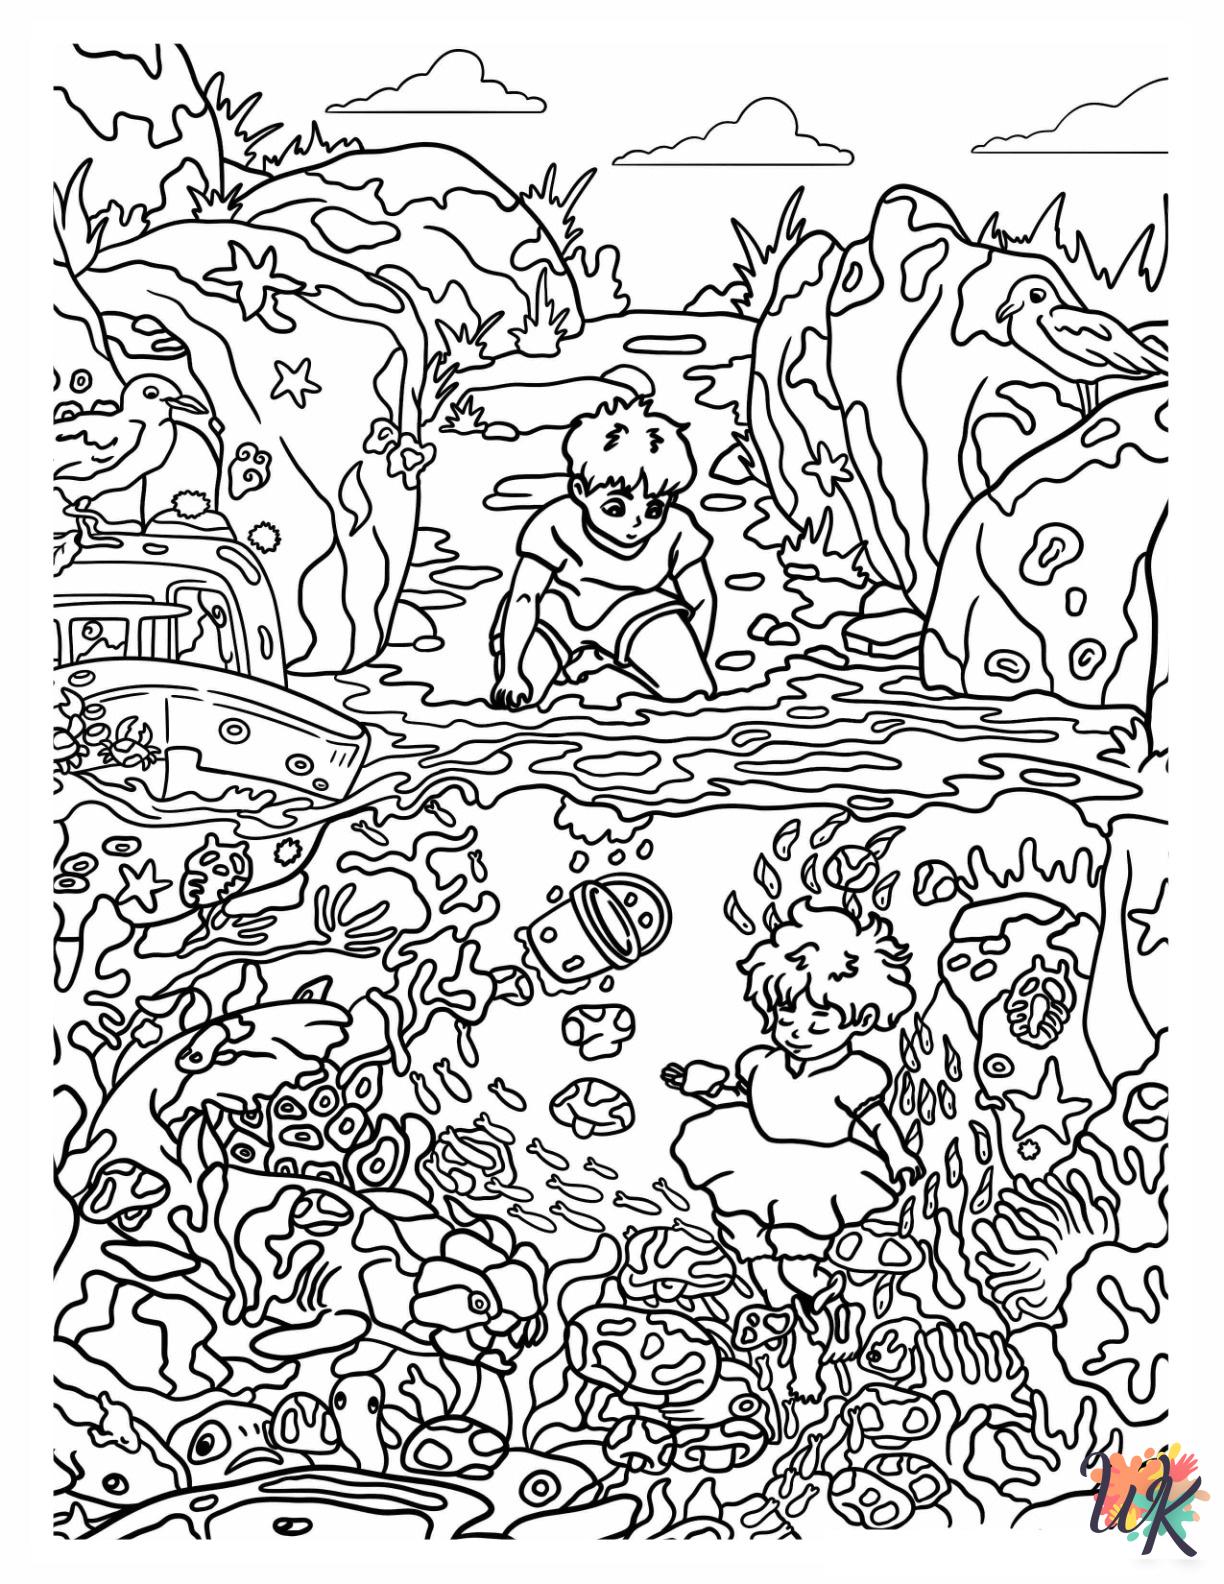 Aesthetic coloring pages for preschoolers